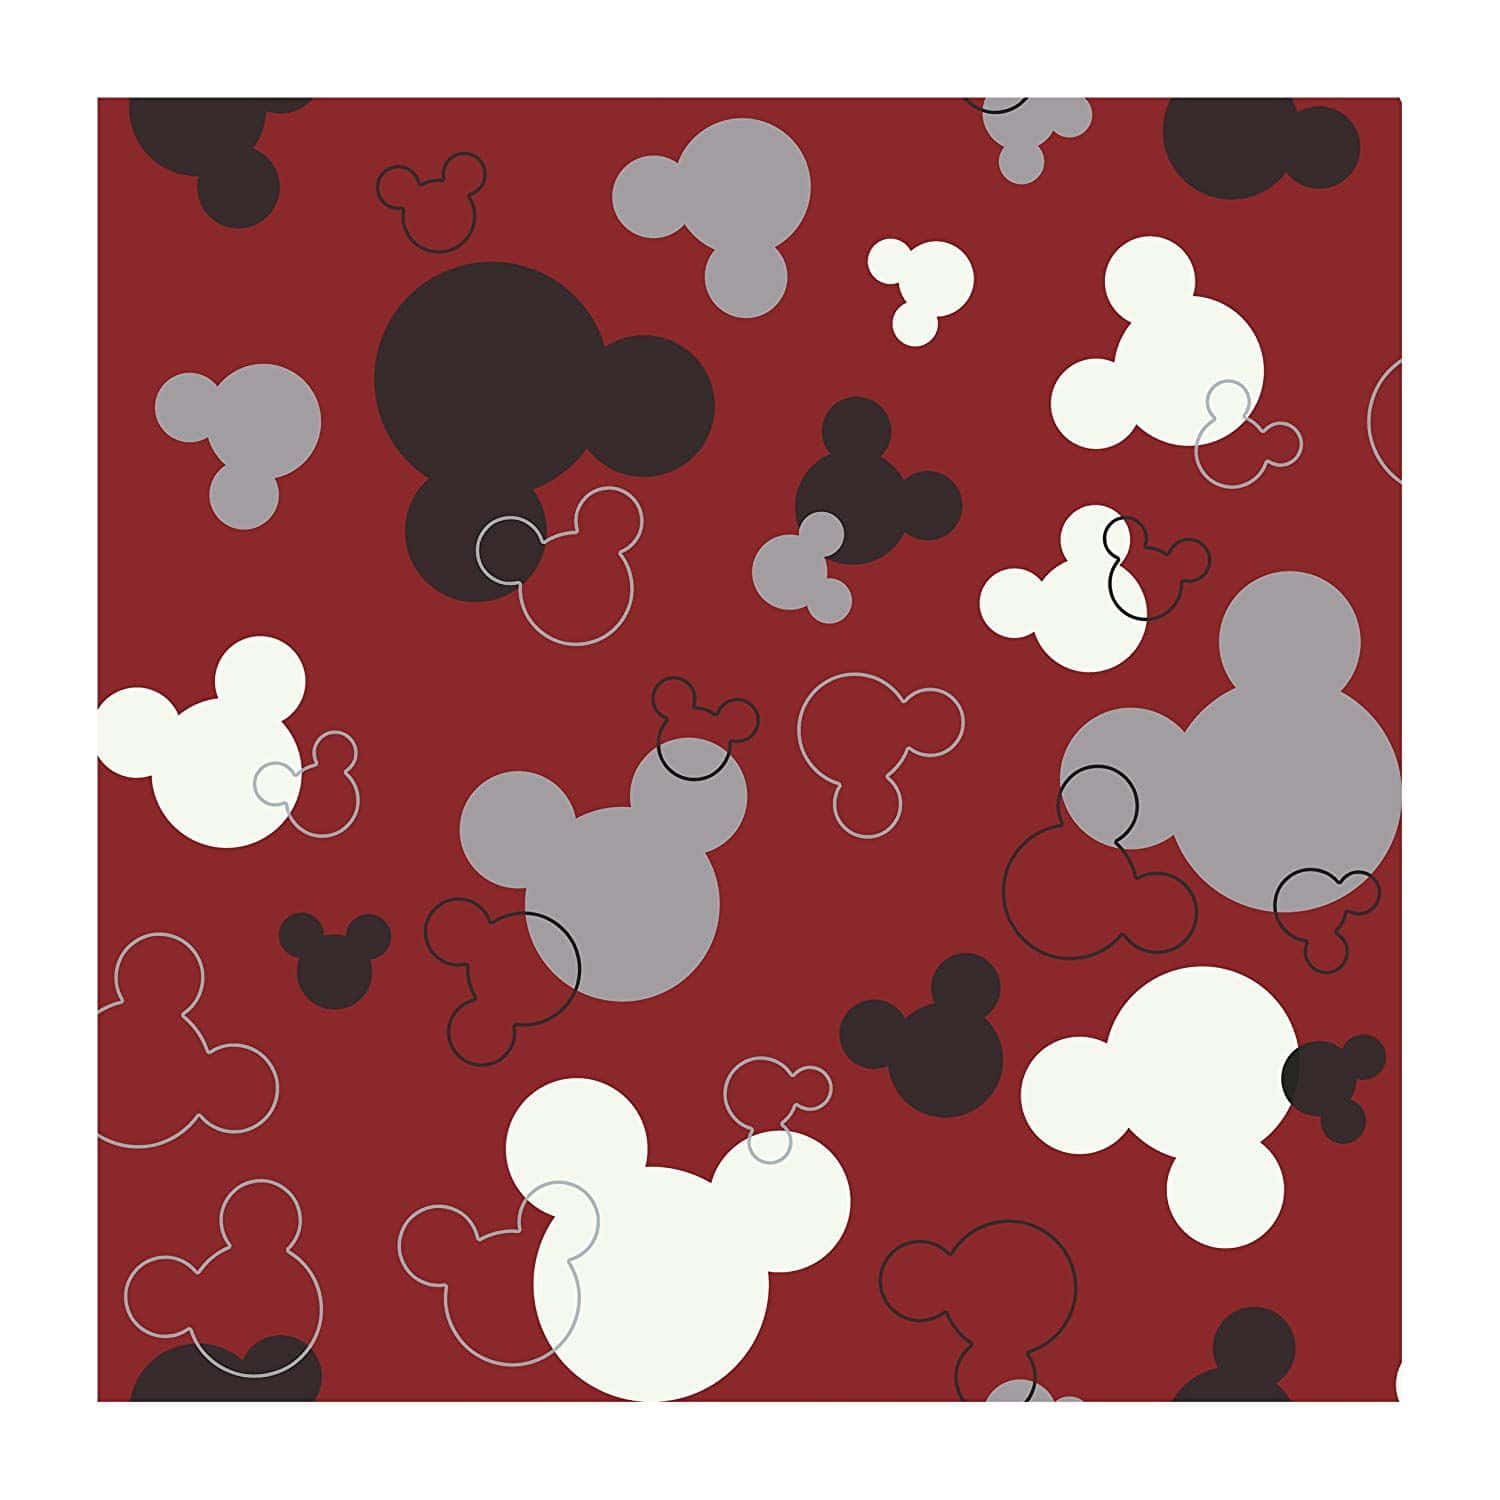 An all-time favorite classic: Mickey Mouse Ears! Wallpaper